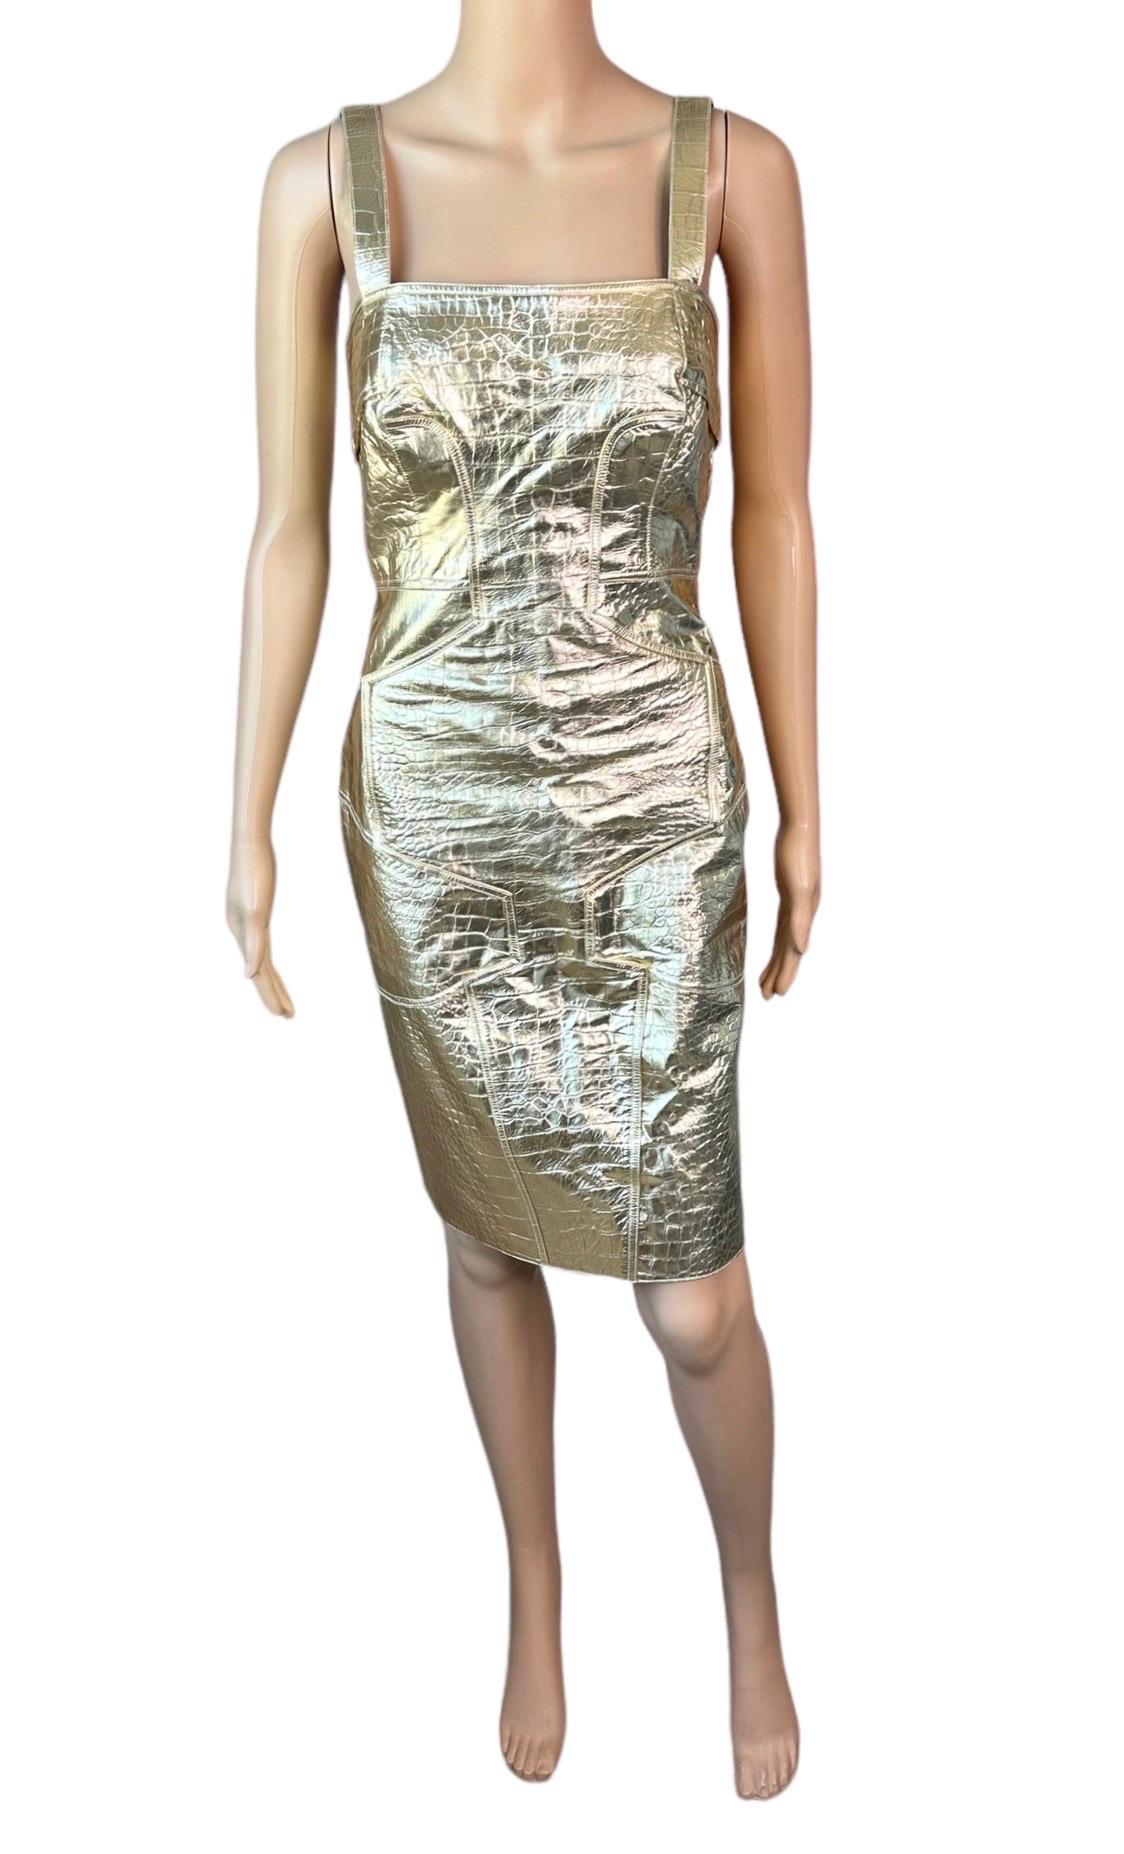 Women's Versace S/S 2009 Runway Metallic Gold Leather Campaign Dress  For Sale